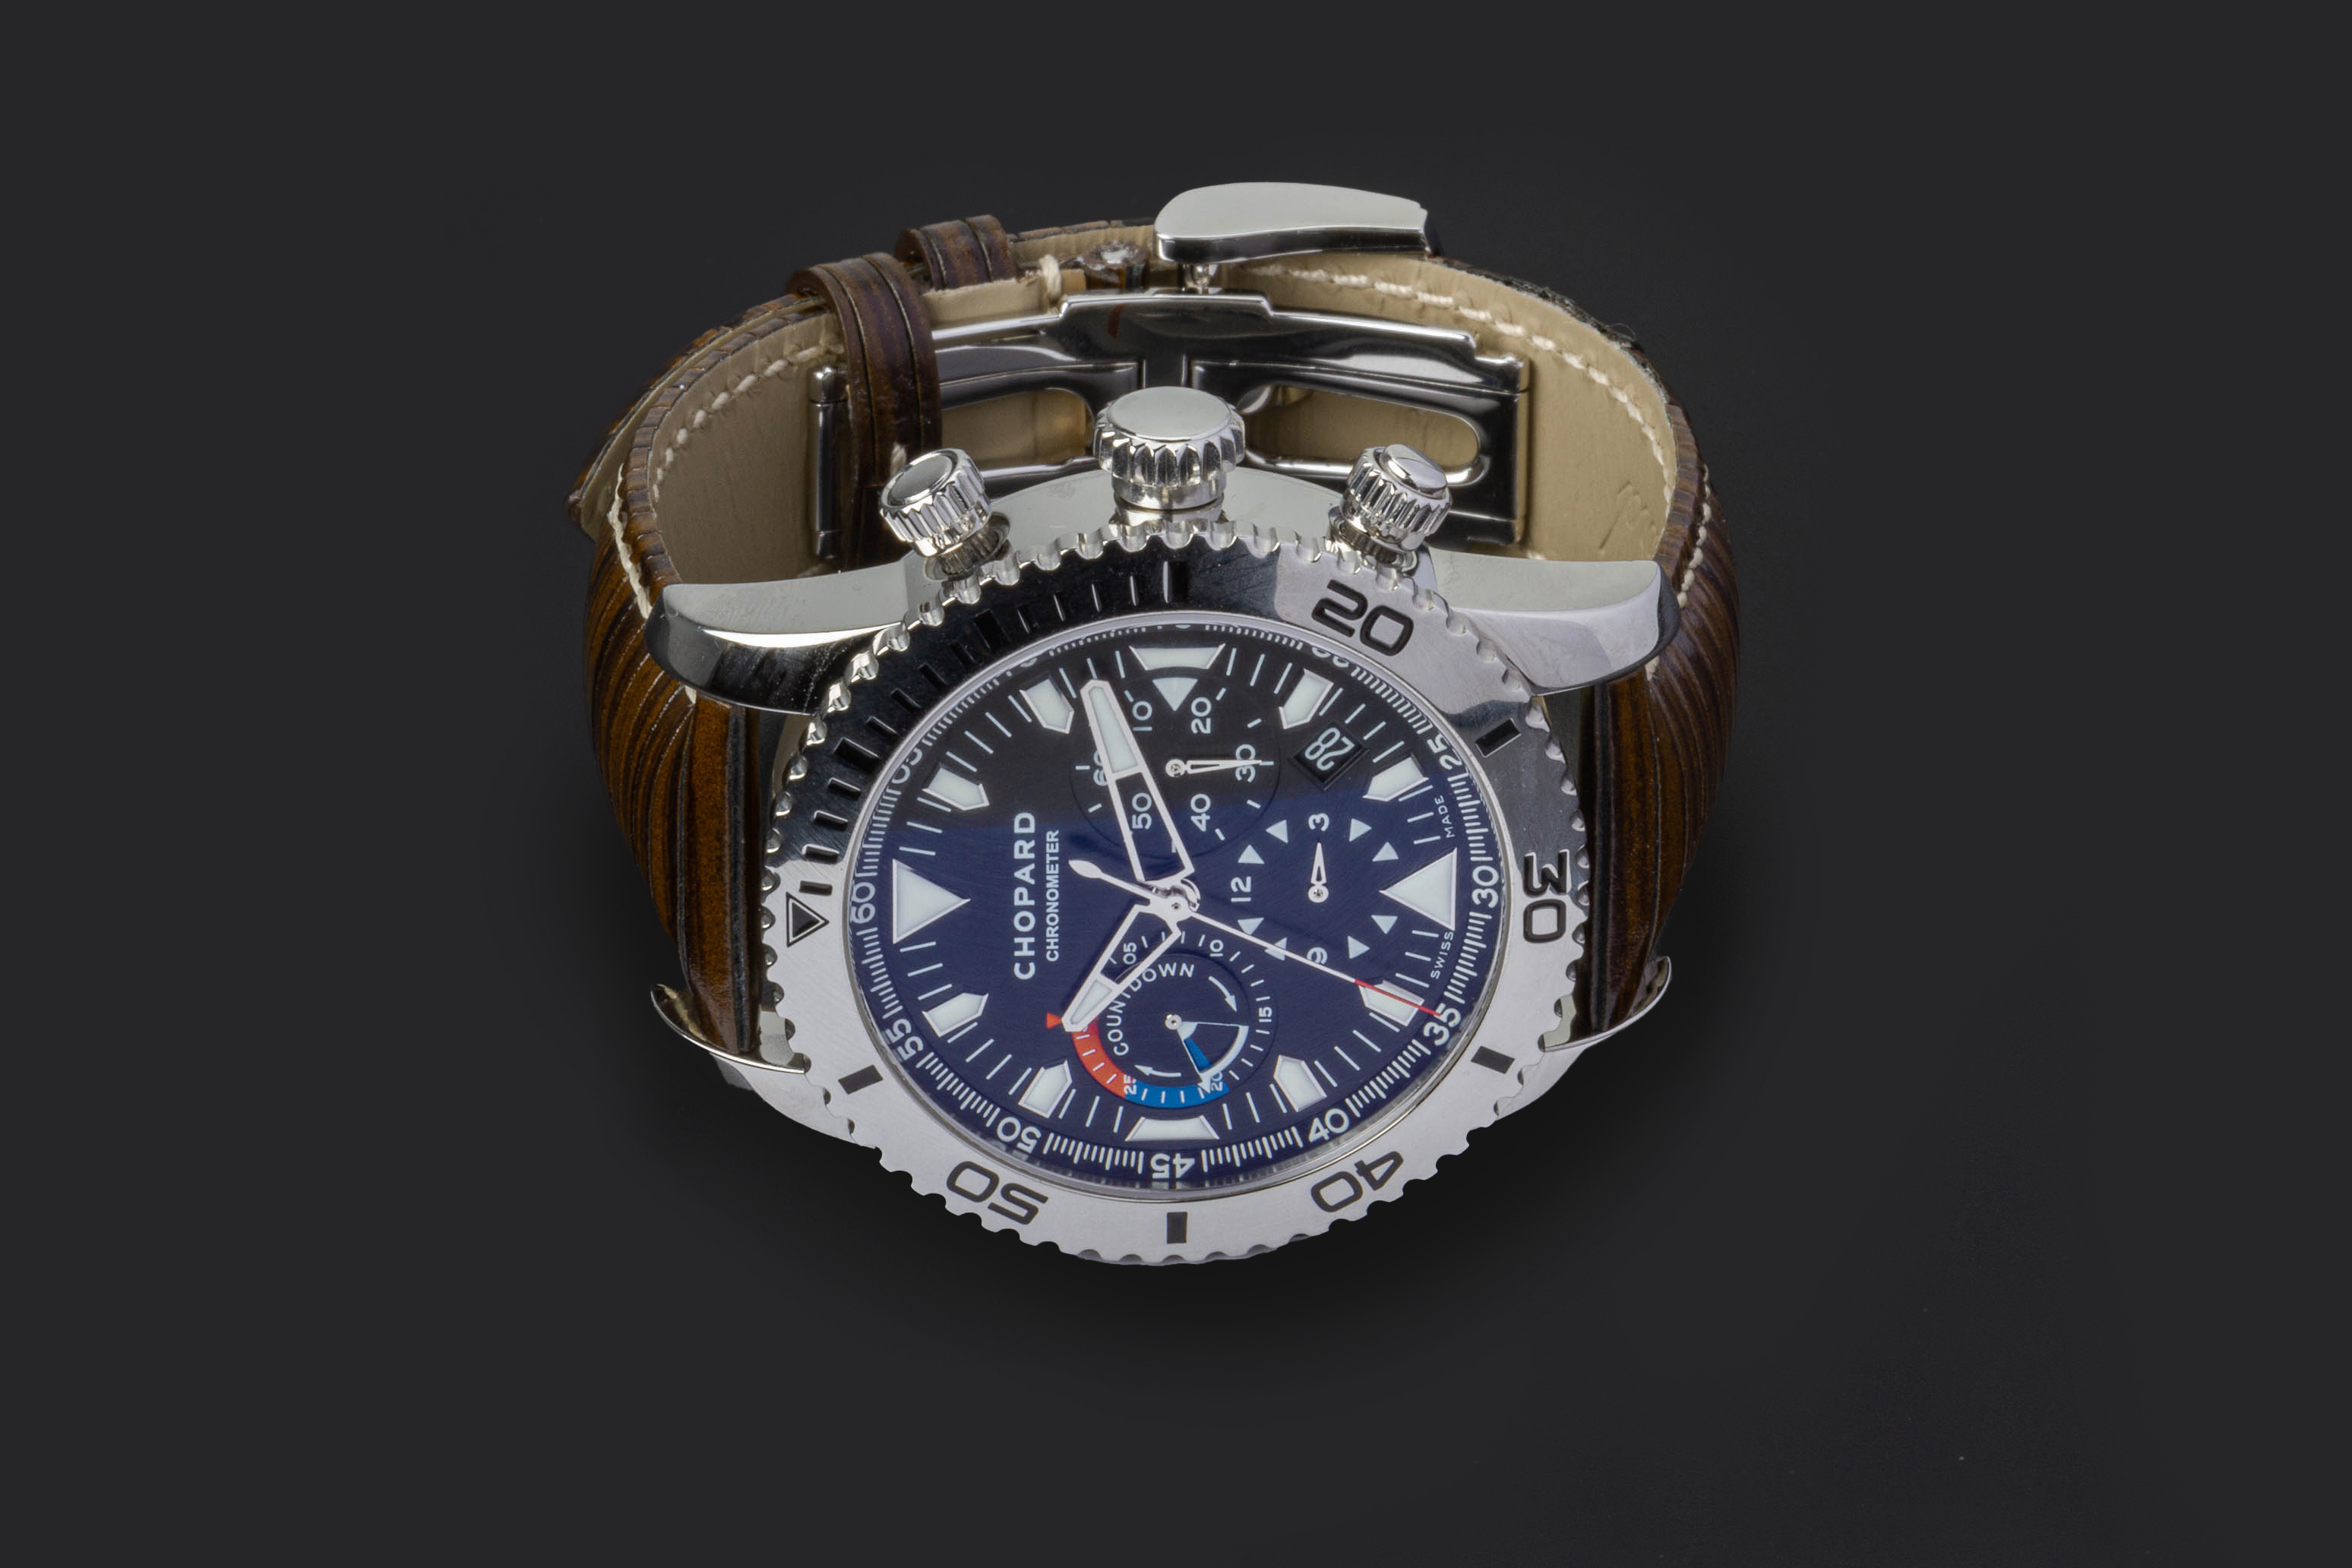 A CHOPARD CLASSIC YACHTING CHRONOGRAPH WRISTWATCH - Image 3 of 3